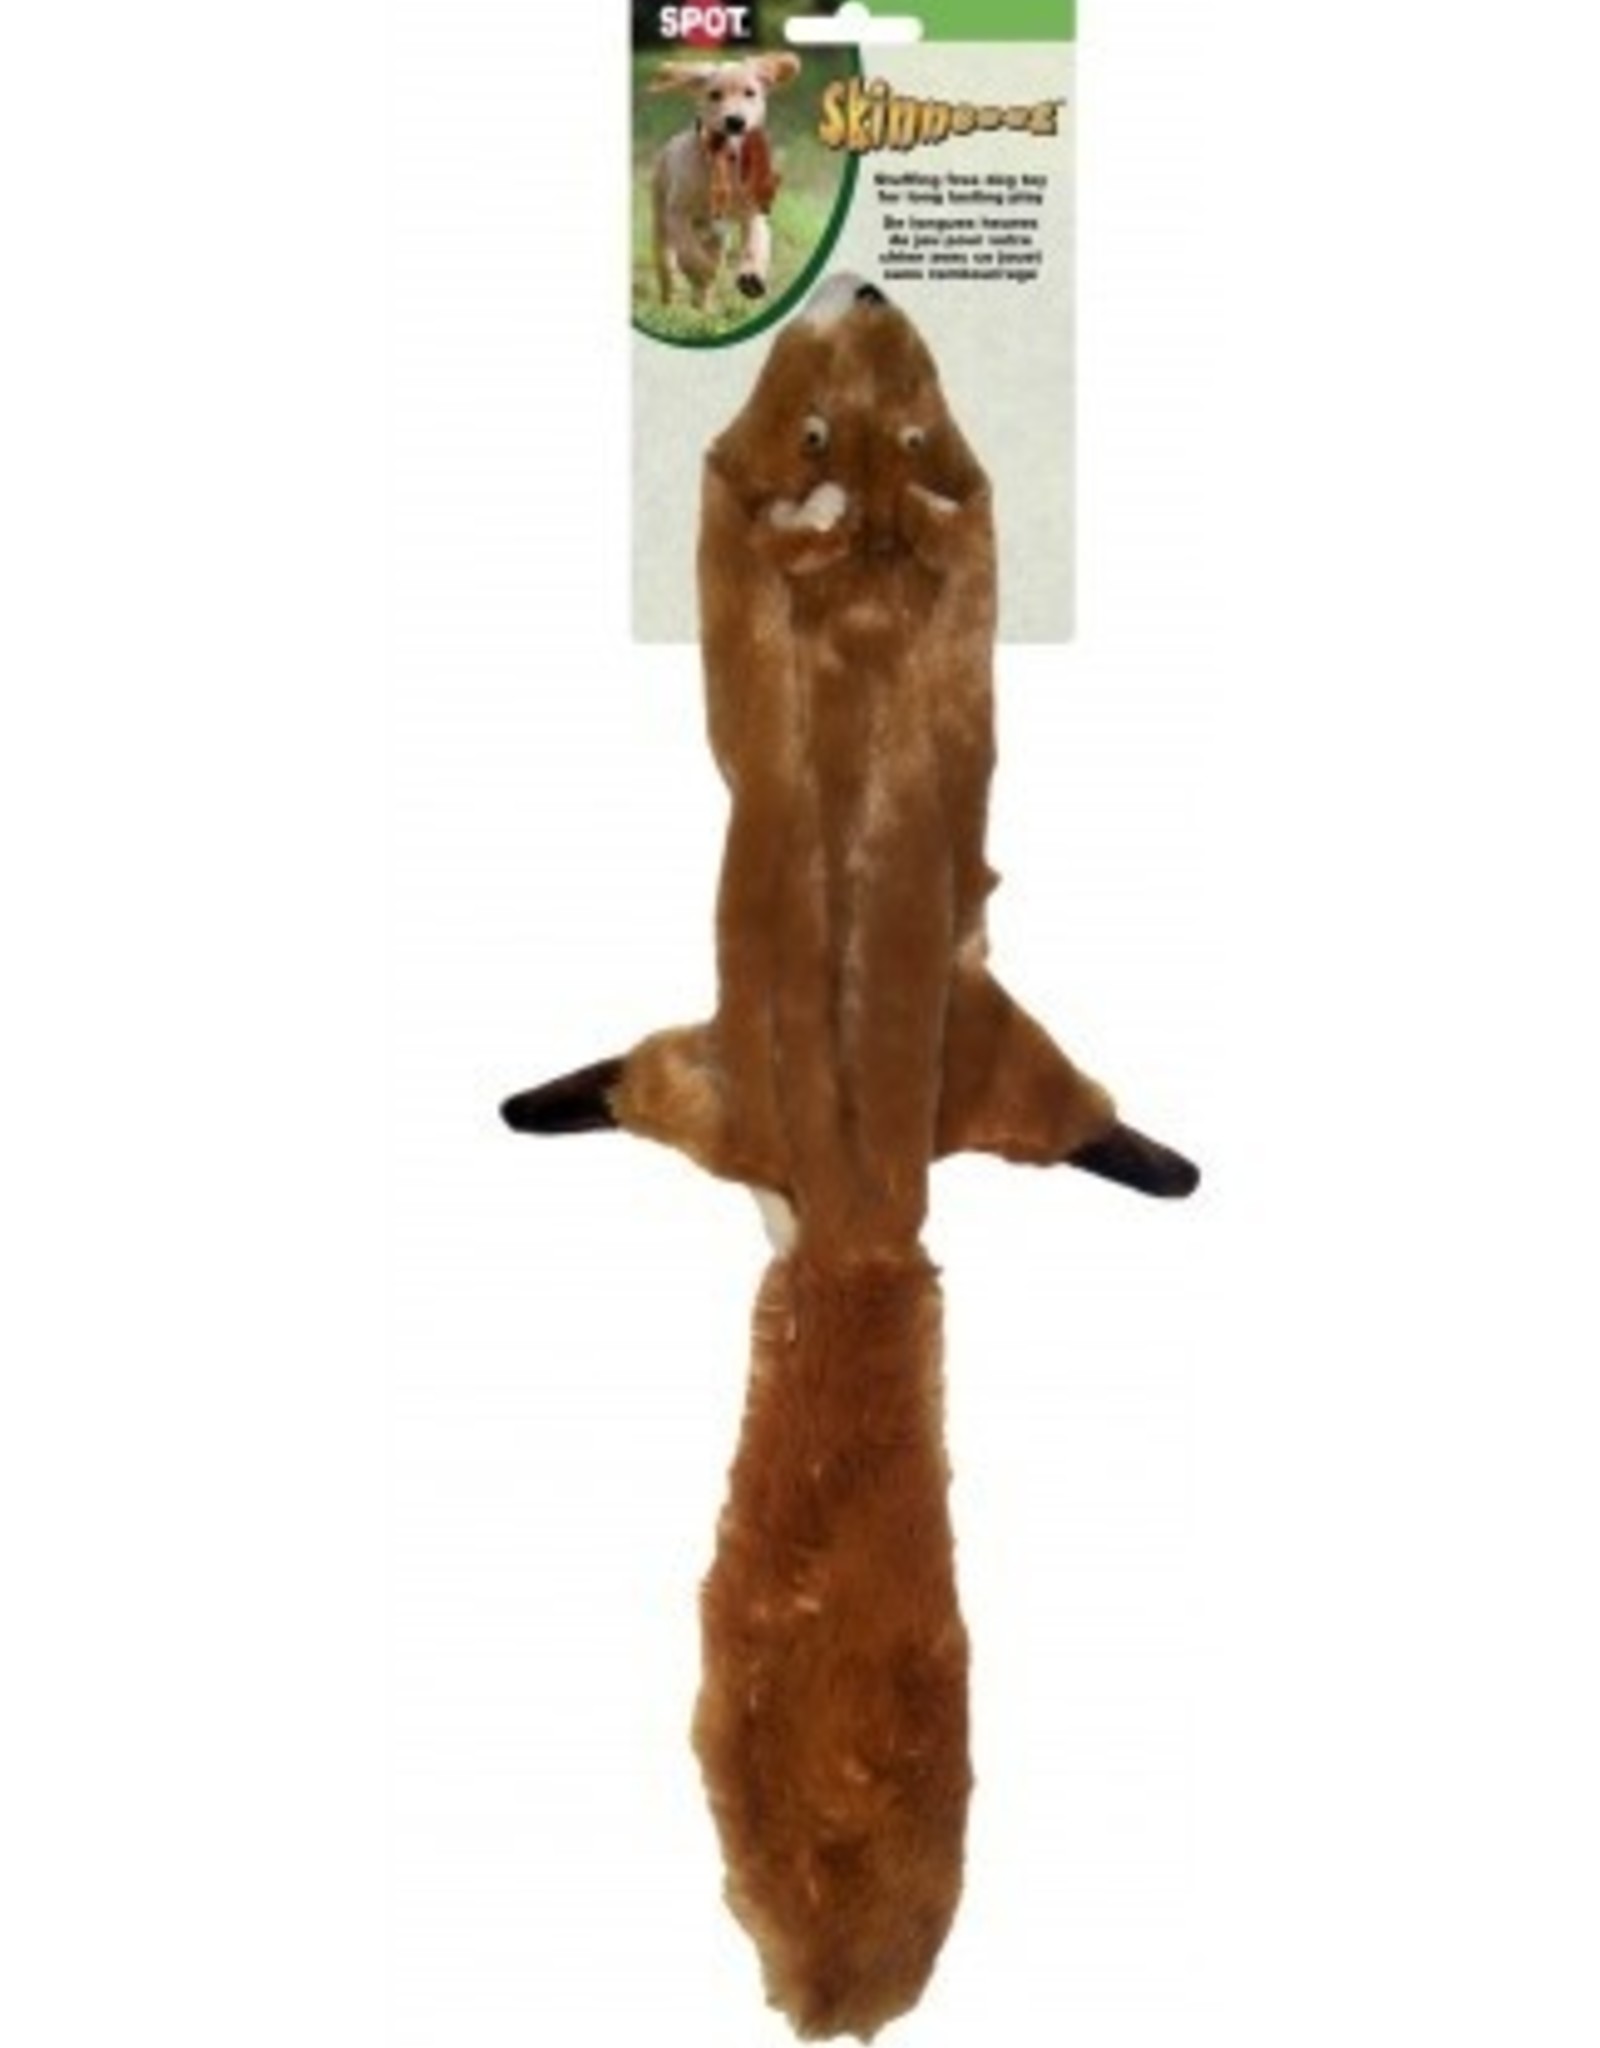 ETHICAL PRODUCTS, INC. SKINNEEEZ SQUIRREL